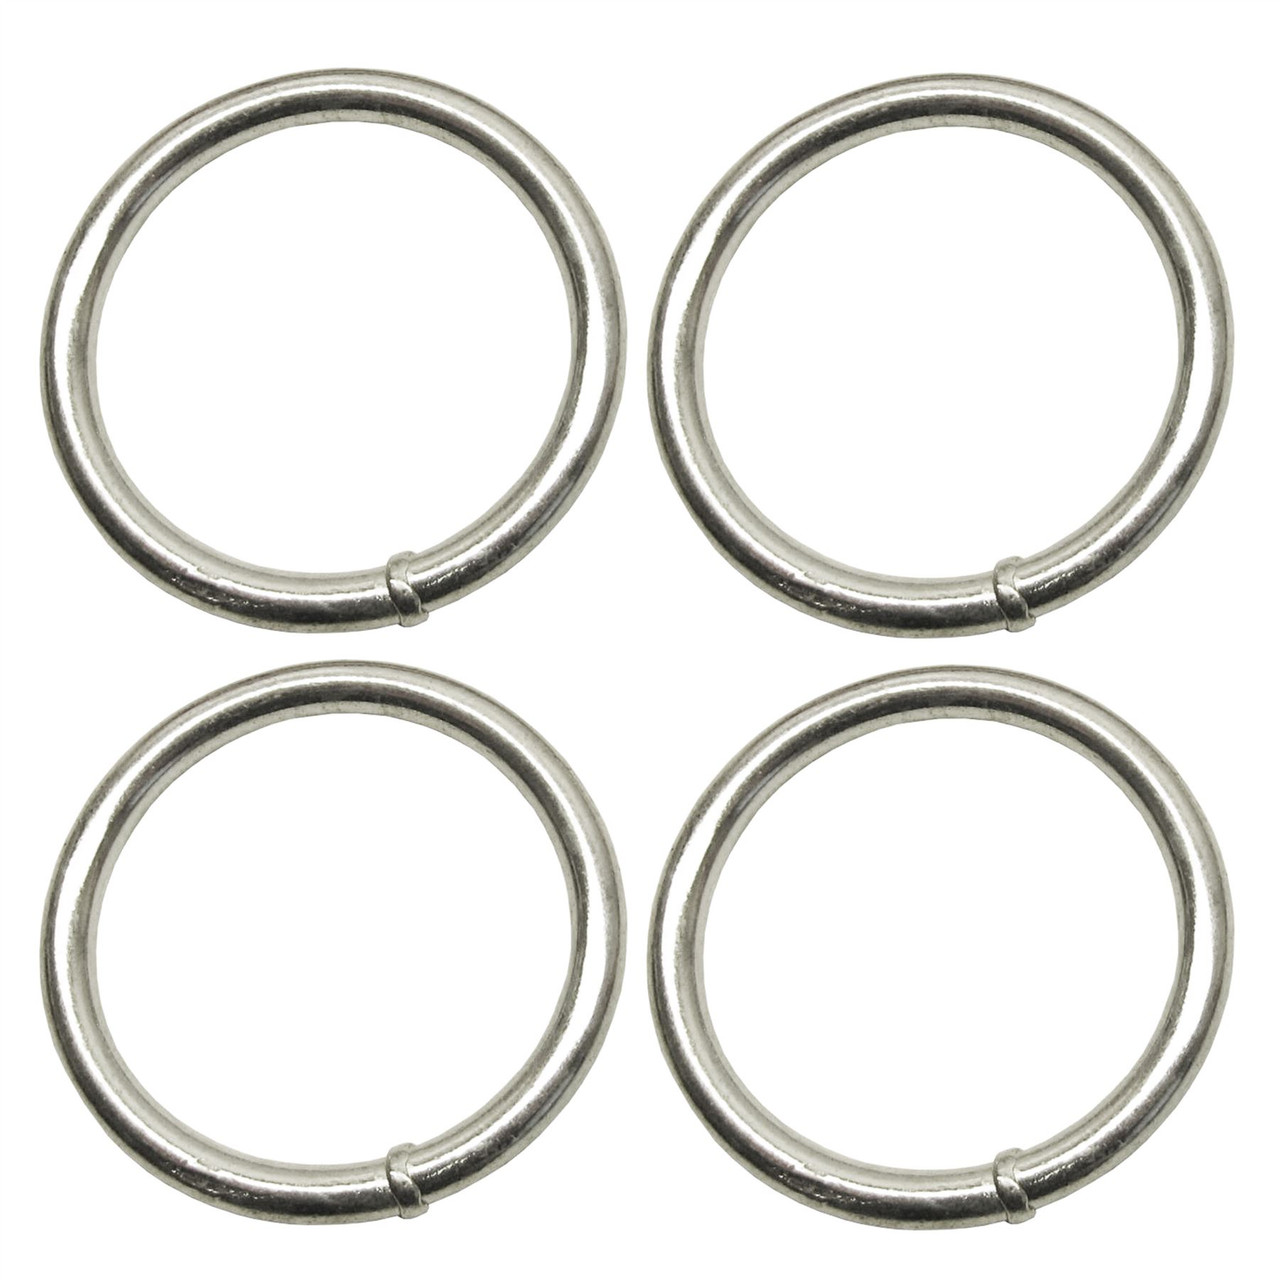 5mm x 40mm Steel Round O Rings Welded Zinc Plated 4 PACK DK38